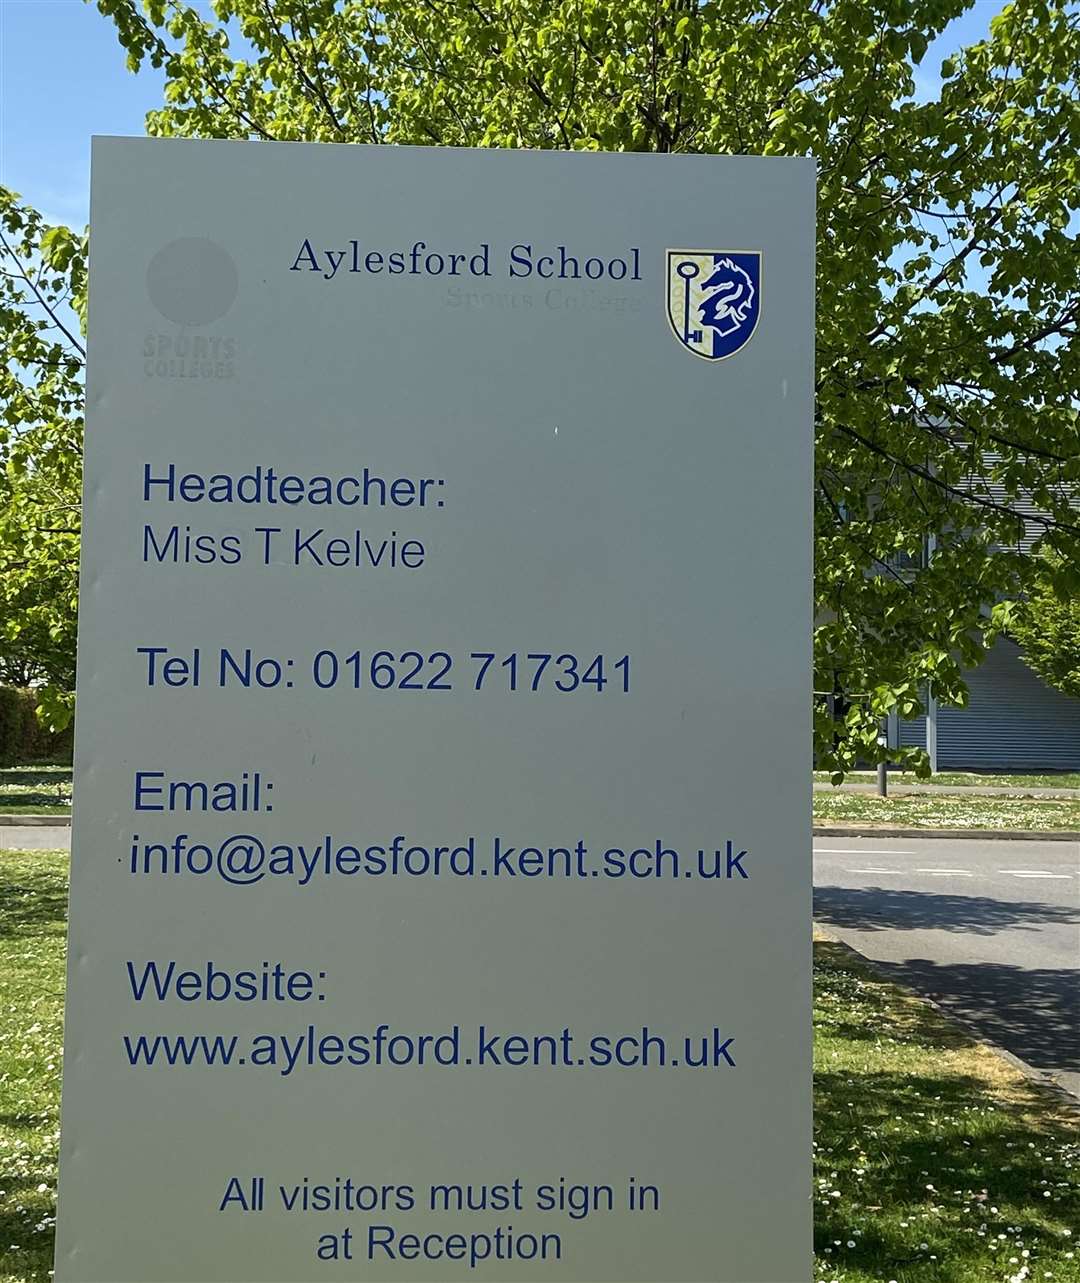 Aylesford School is now closed until January